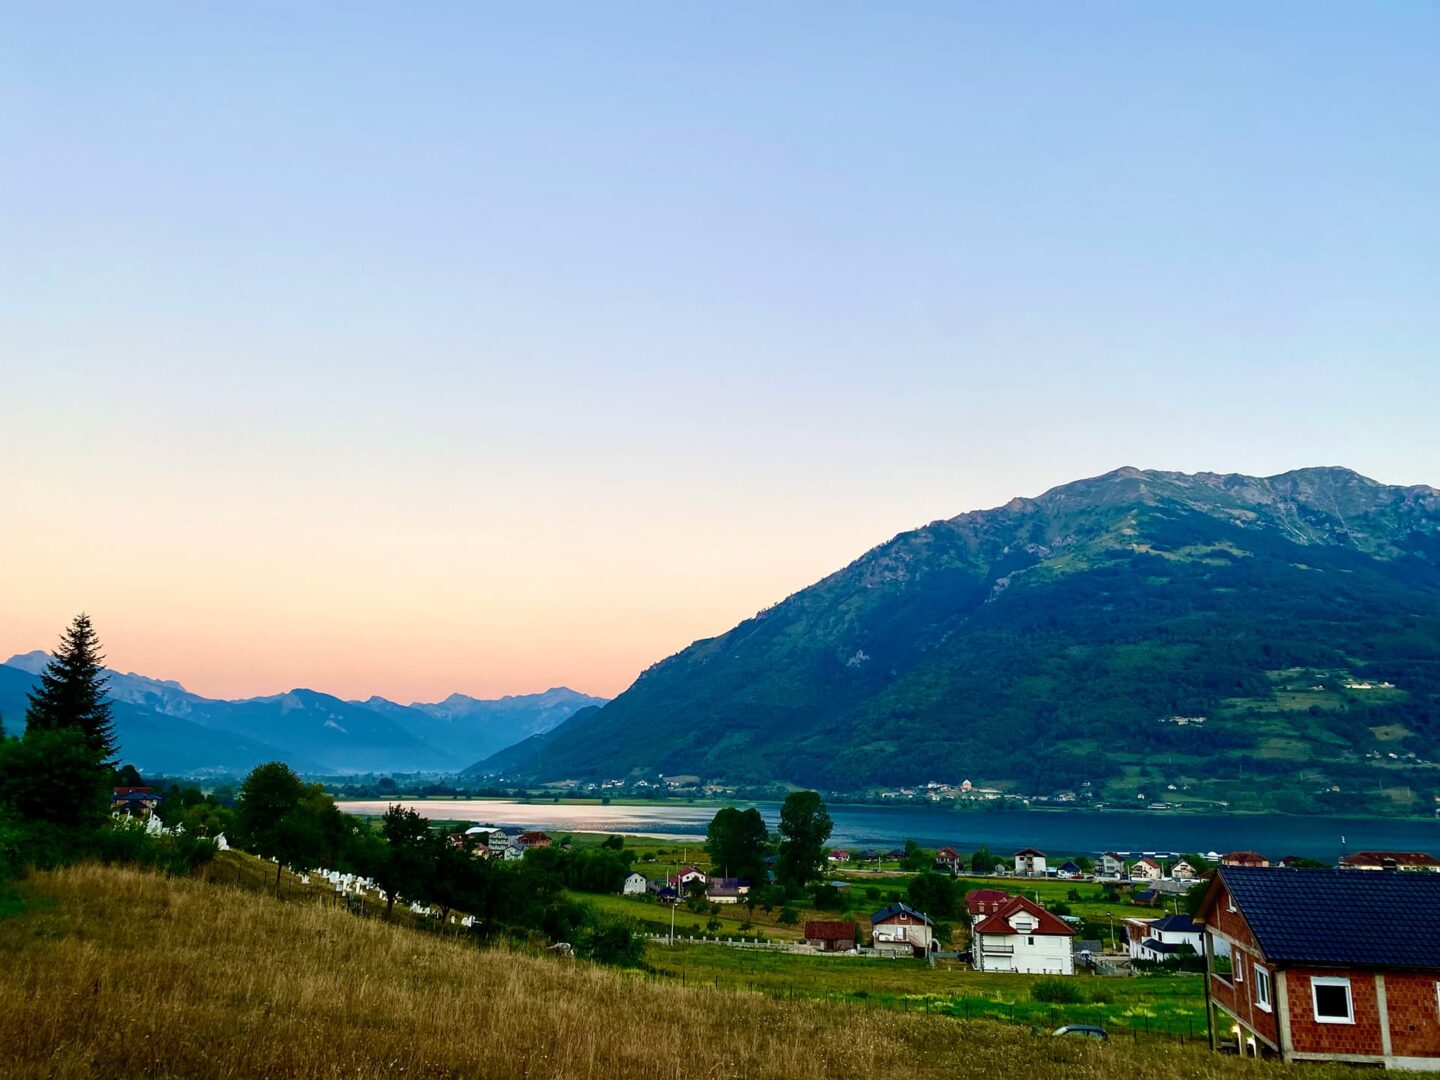 View of small town near a body of water and mountains during sunset